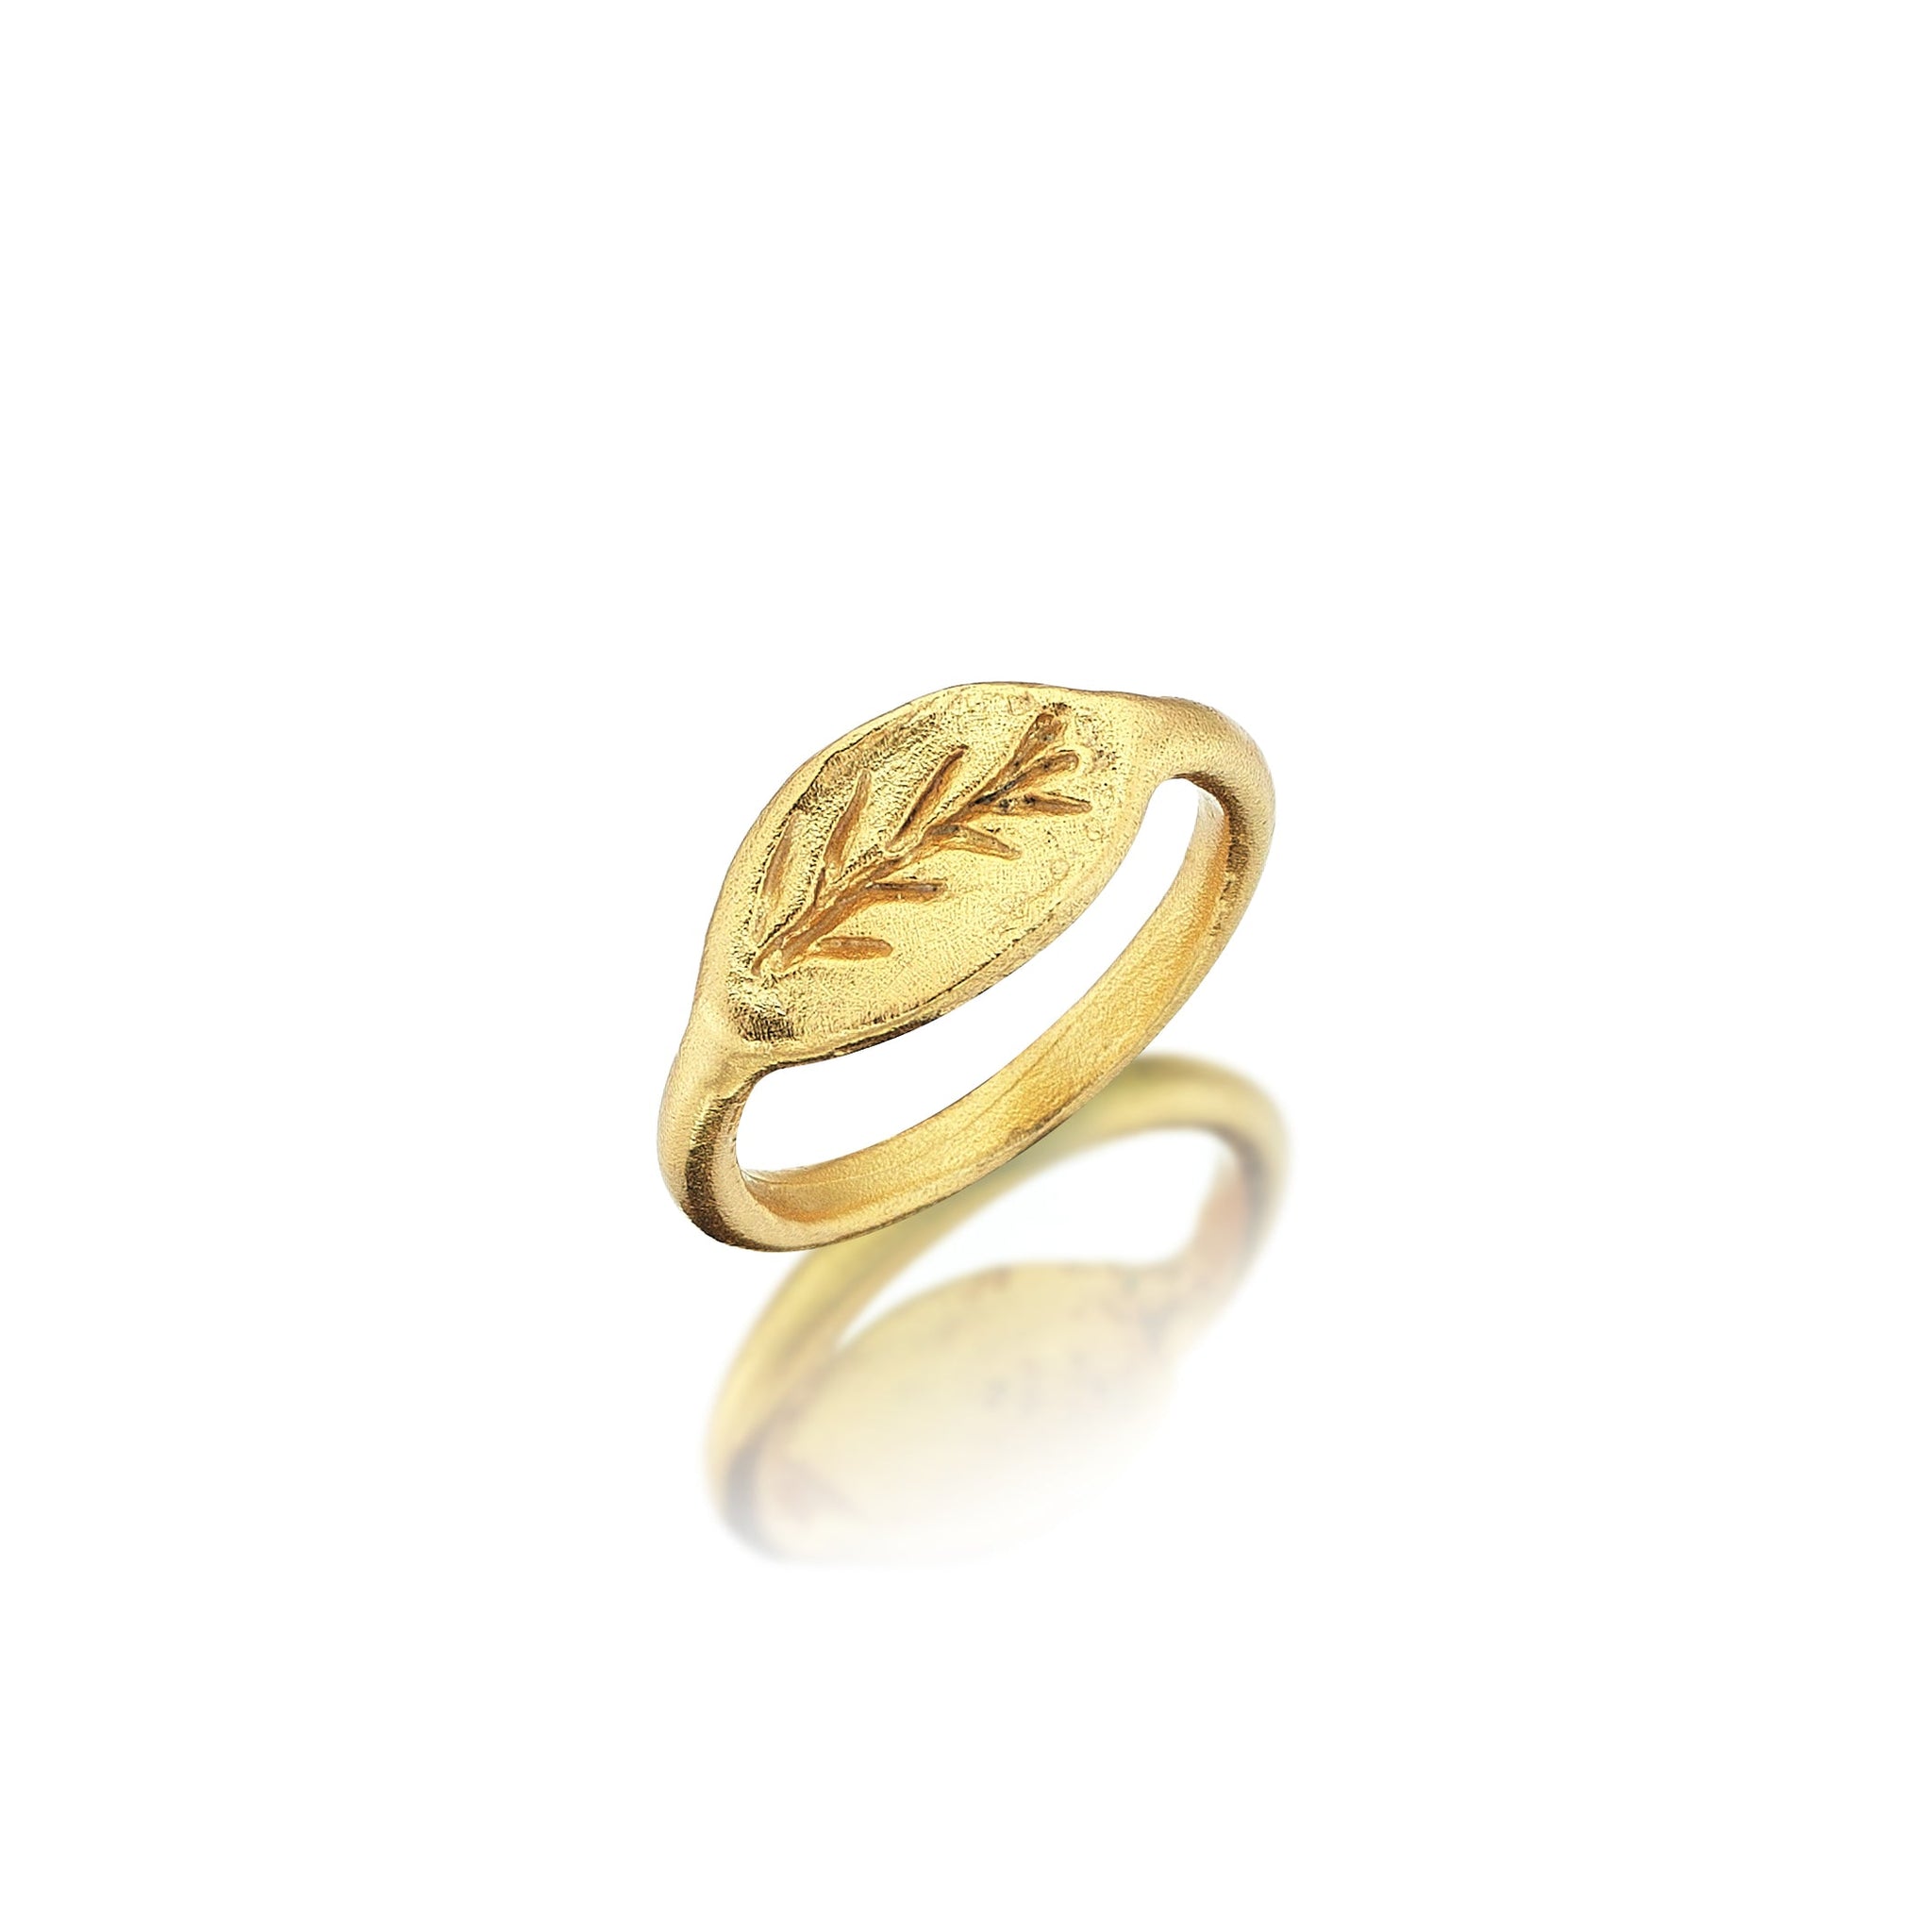 The Olive Branch Ring